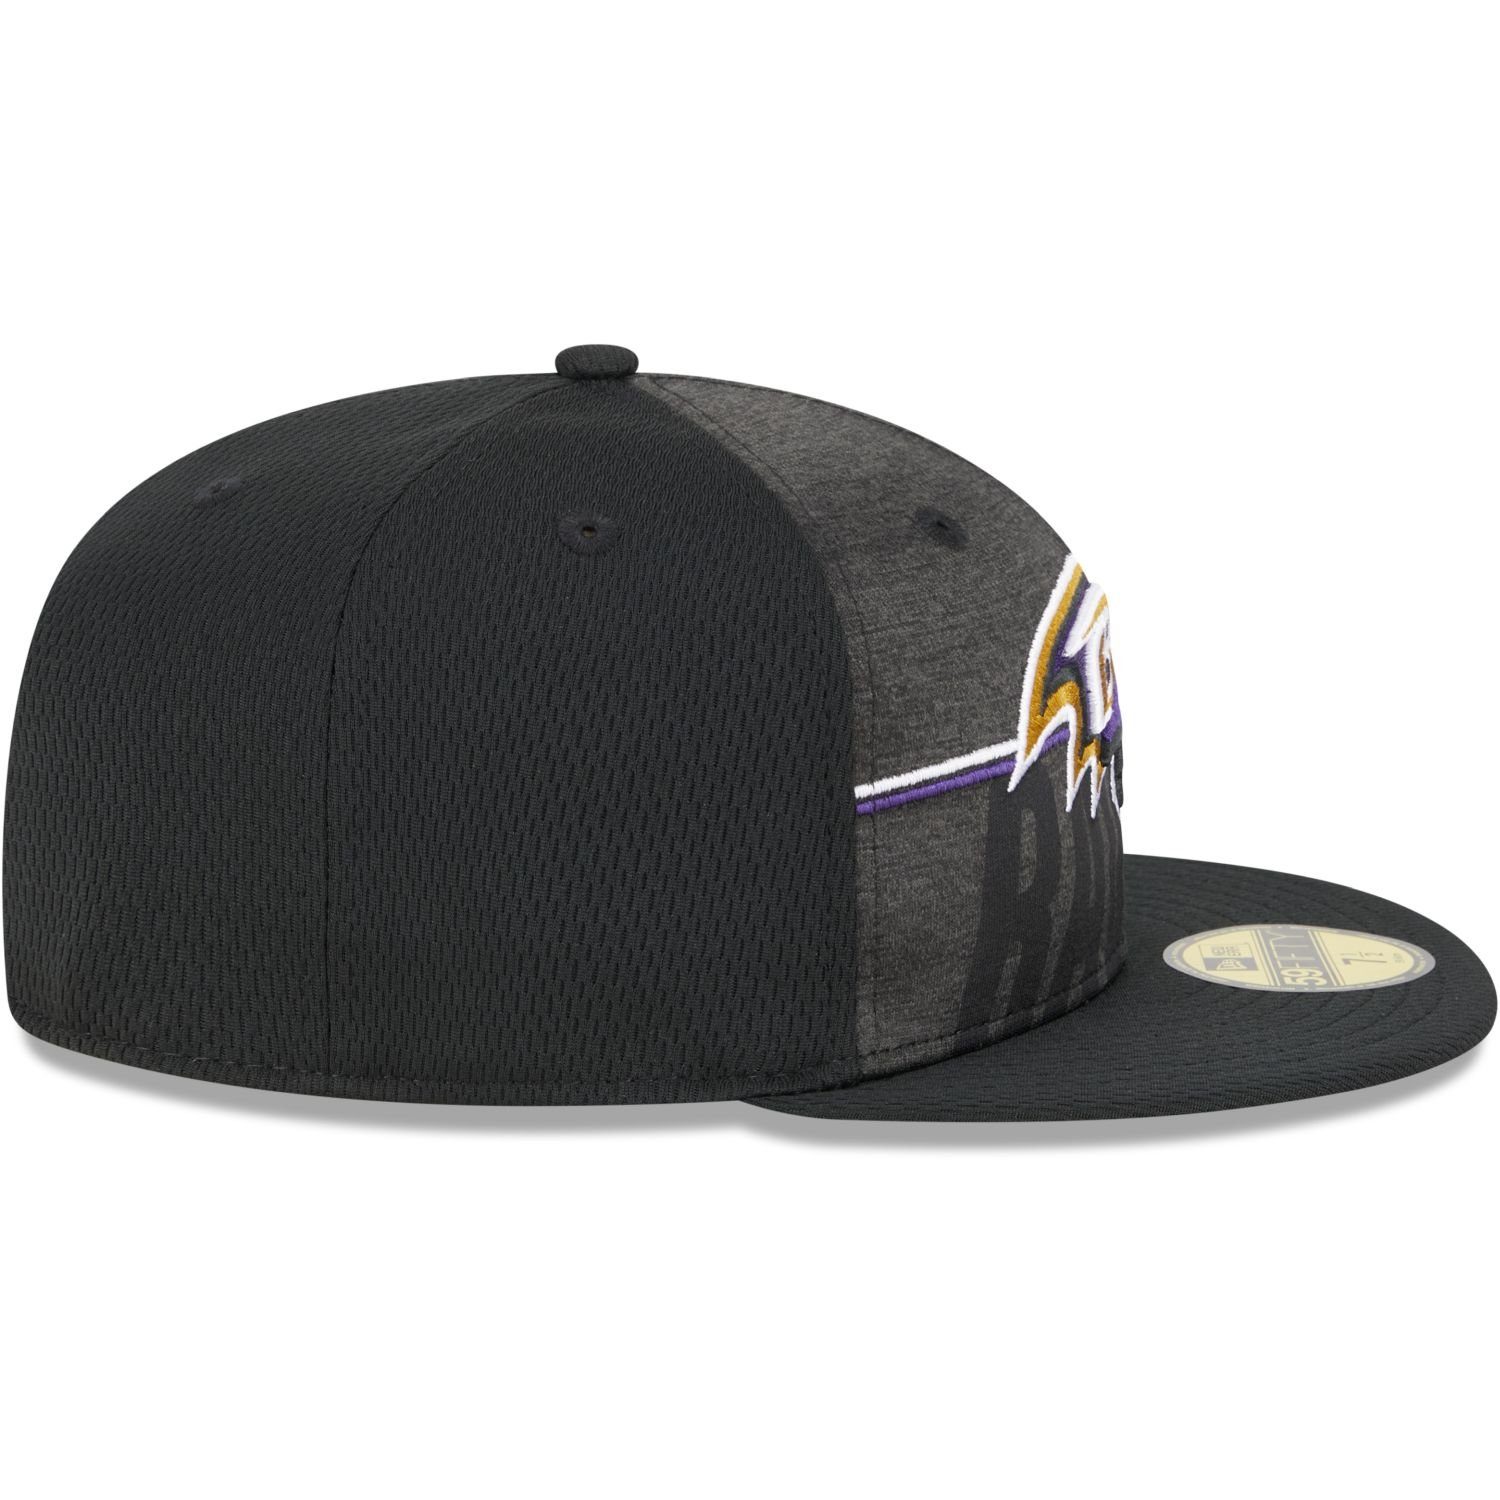 Cap Fitted TRAINING Ravens Baltimore 59Fifty Era NFL New